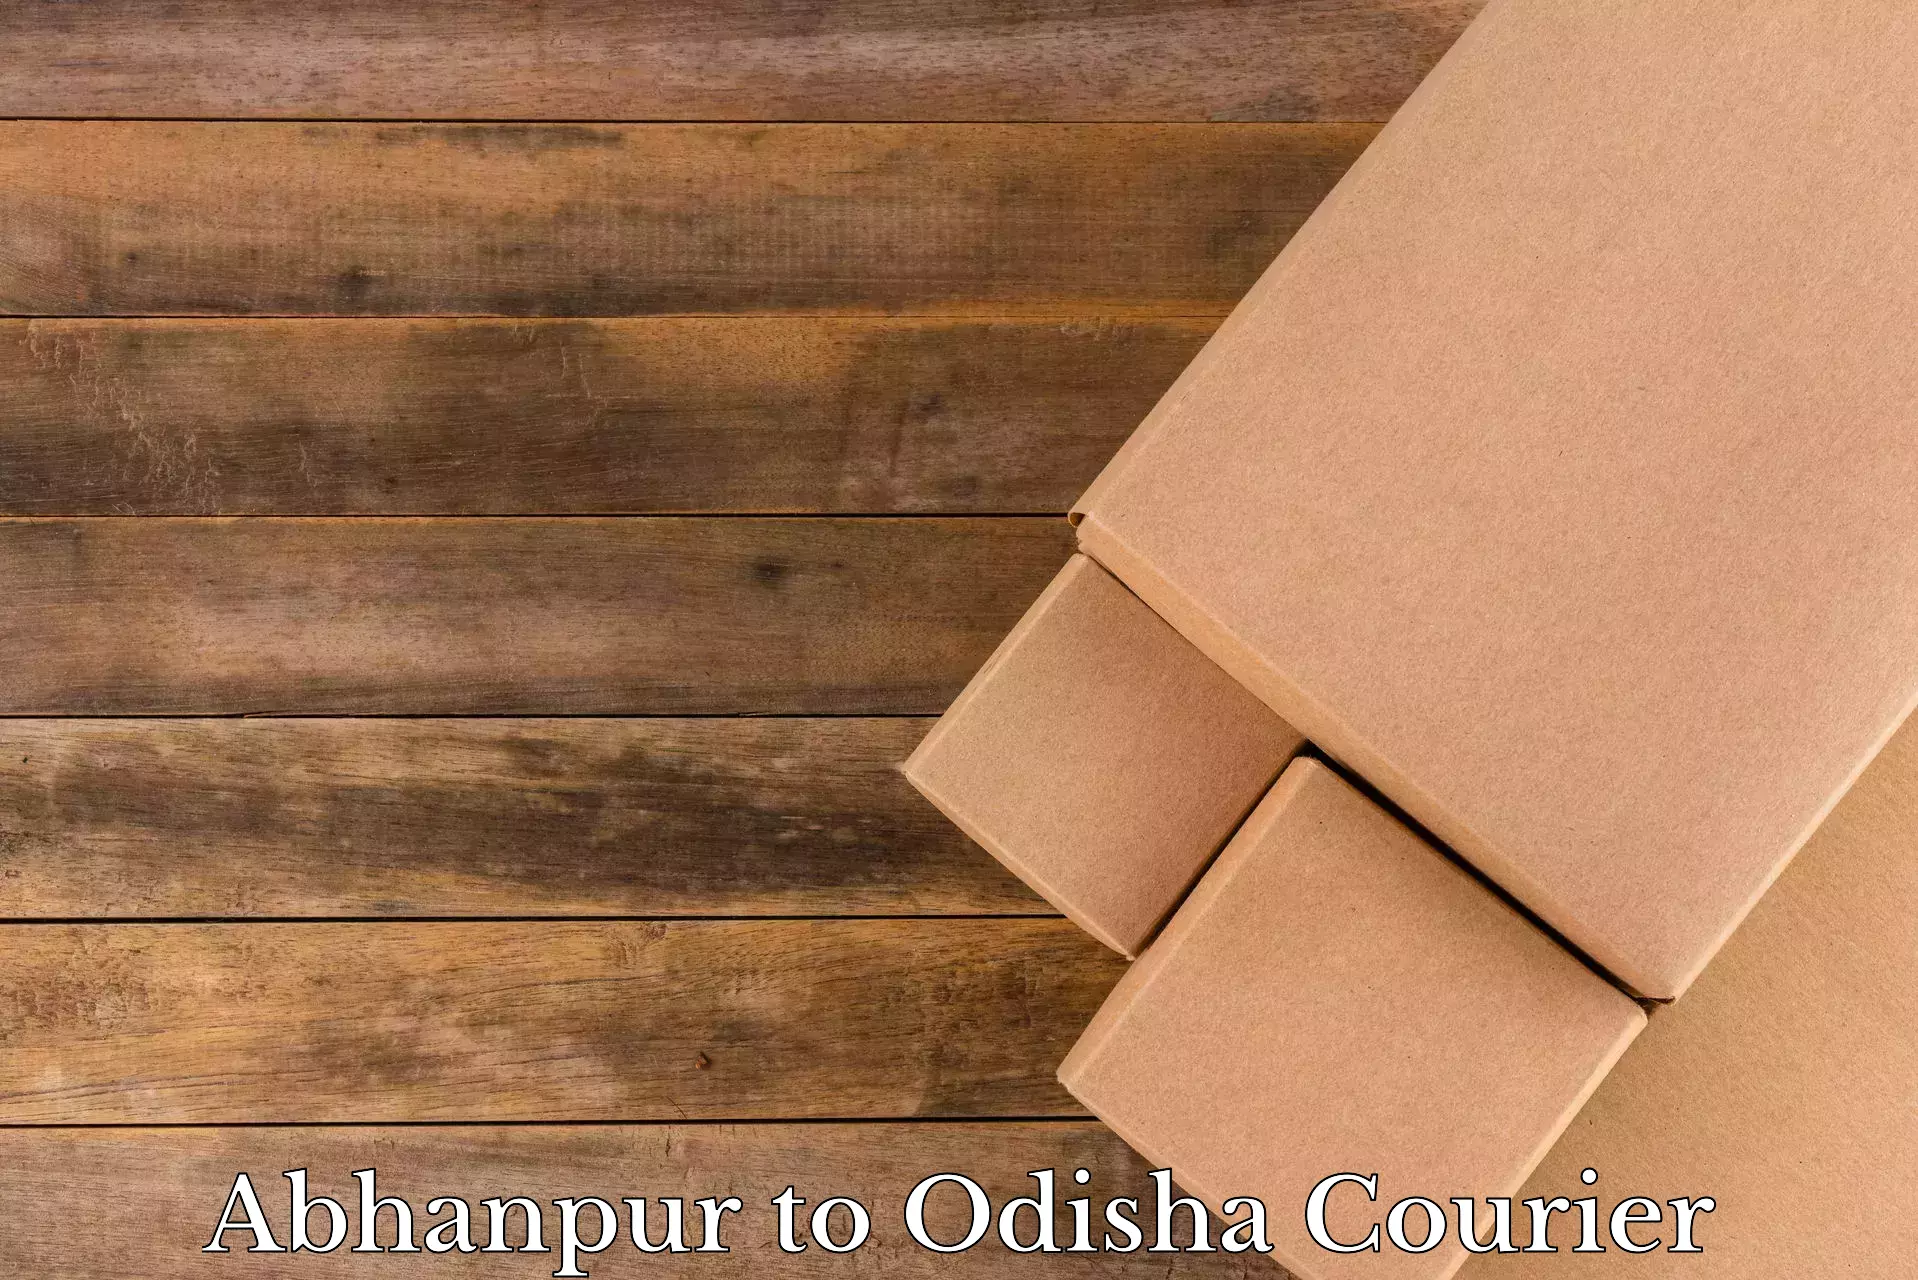 High-quality moving services in Abhanpur to Behrampur